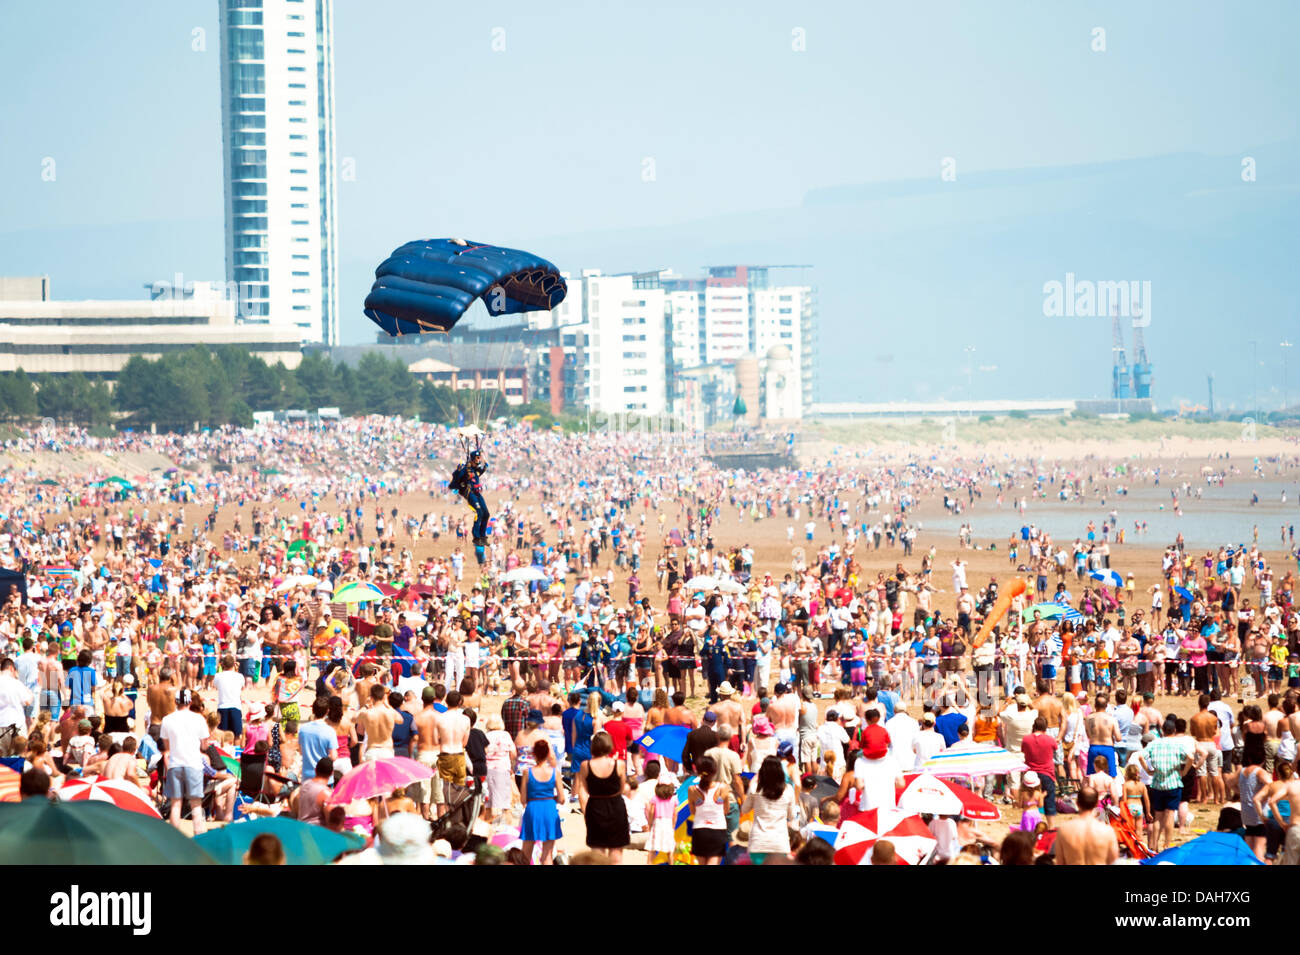 Swansea, Wales, UK. 13th July 2013. A parachute lands on the beach at the 2013 Wales National Airshow on a very hazy summer afternoon. Credit:  Robert Convery/Alamy Live News Stock Photo